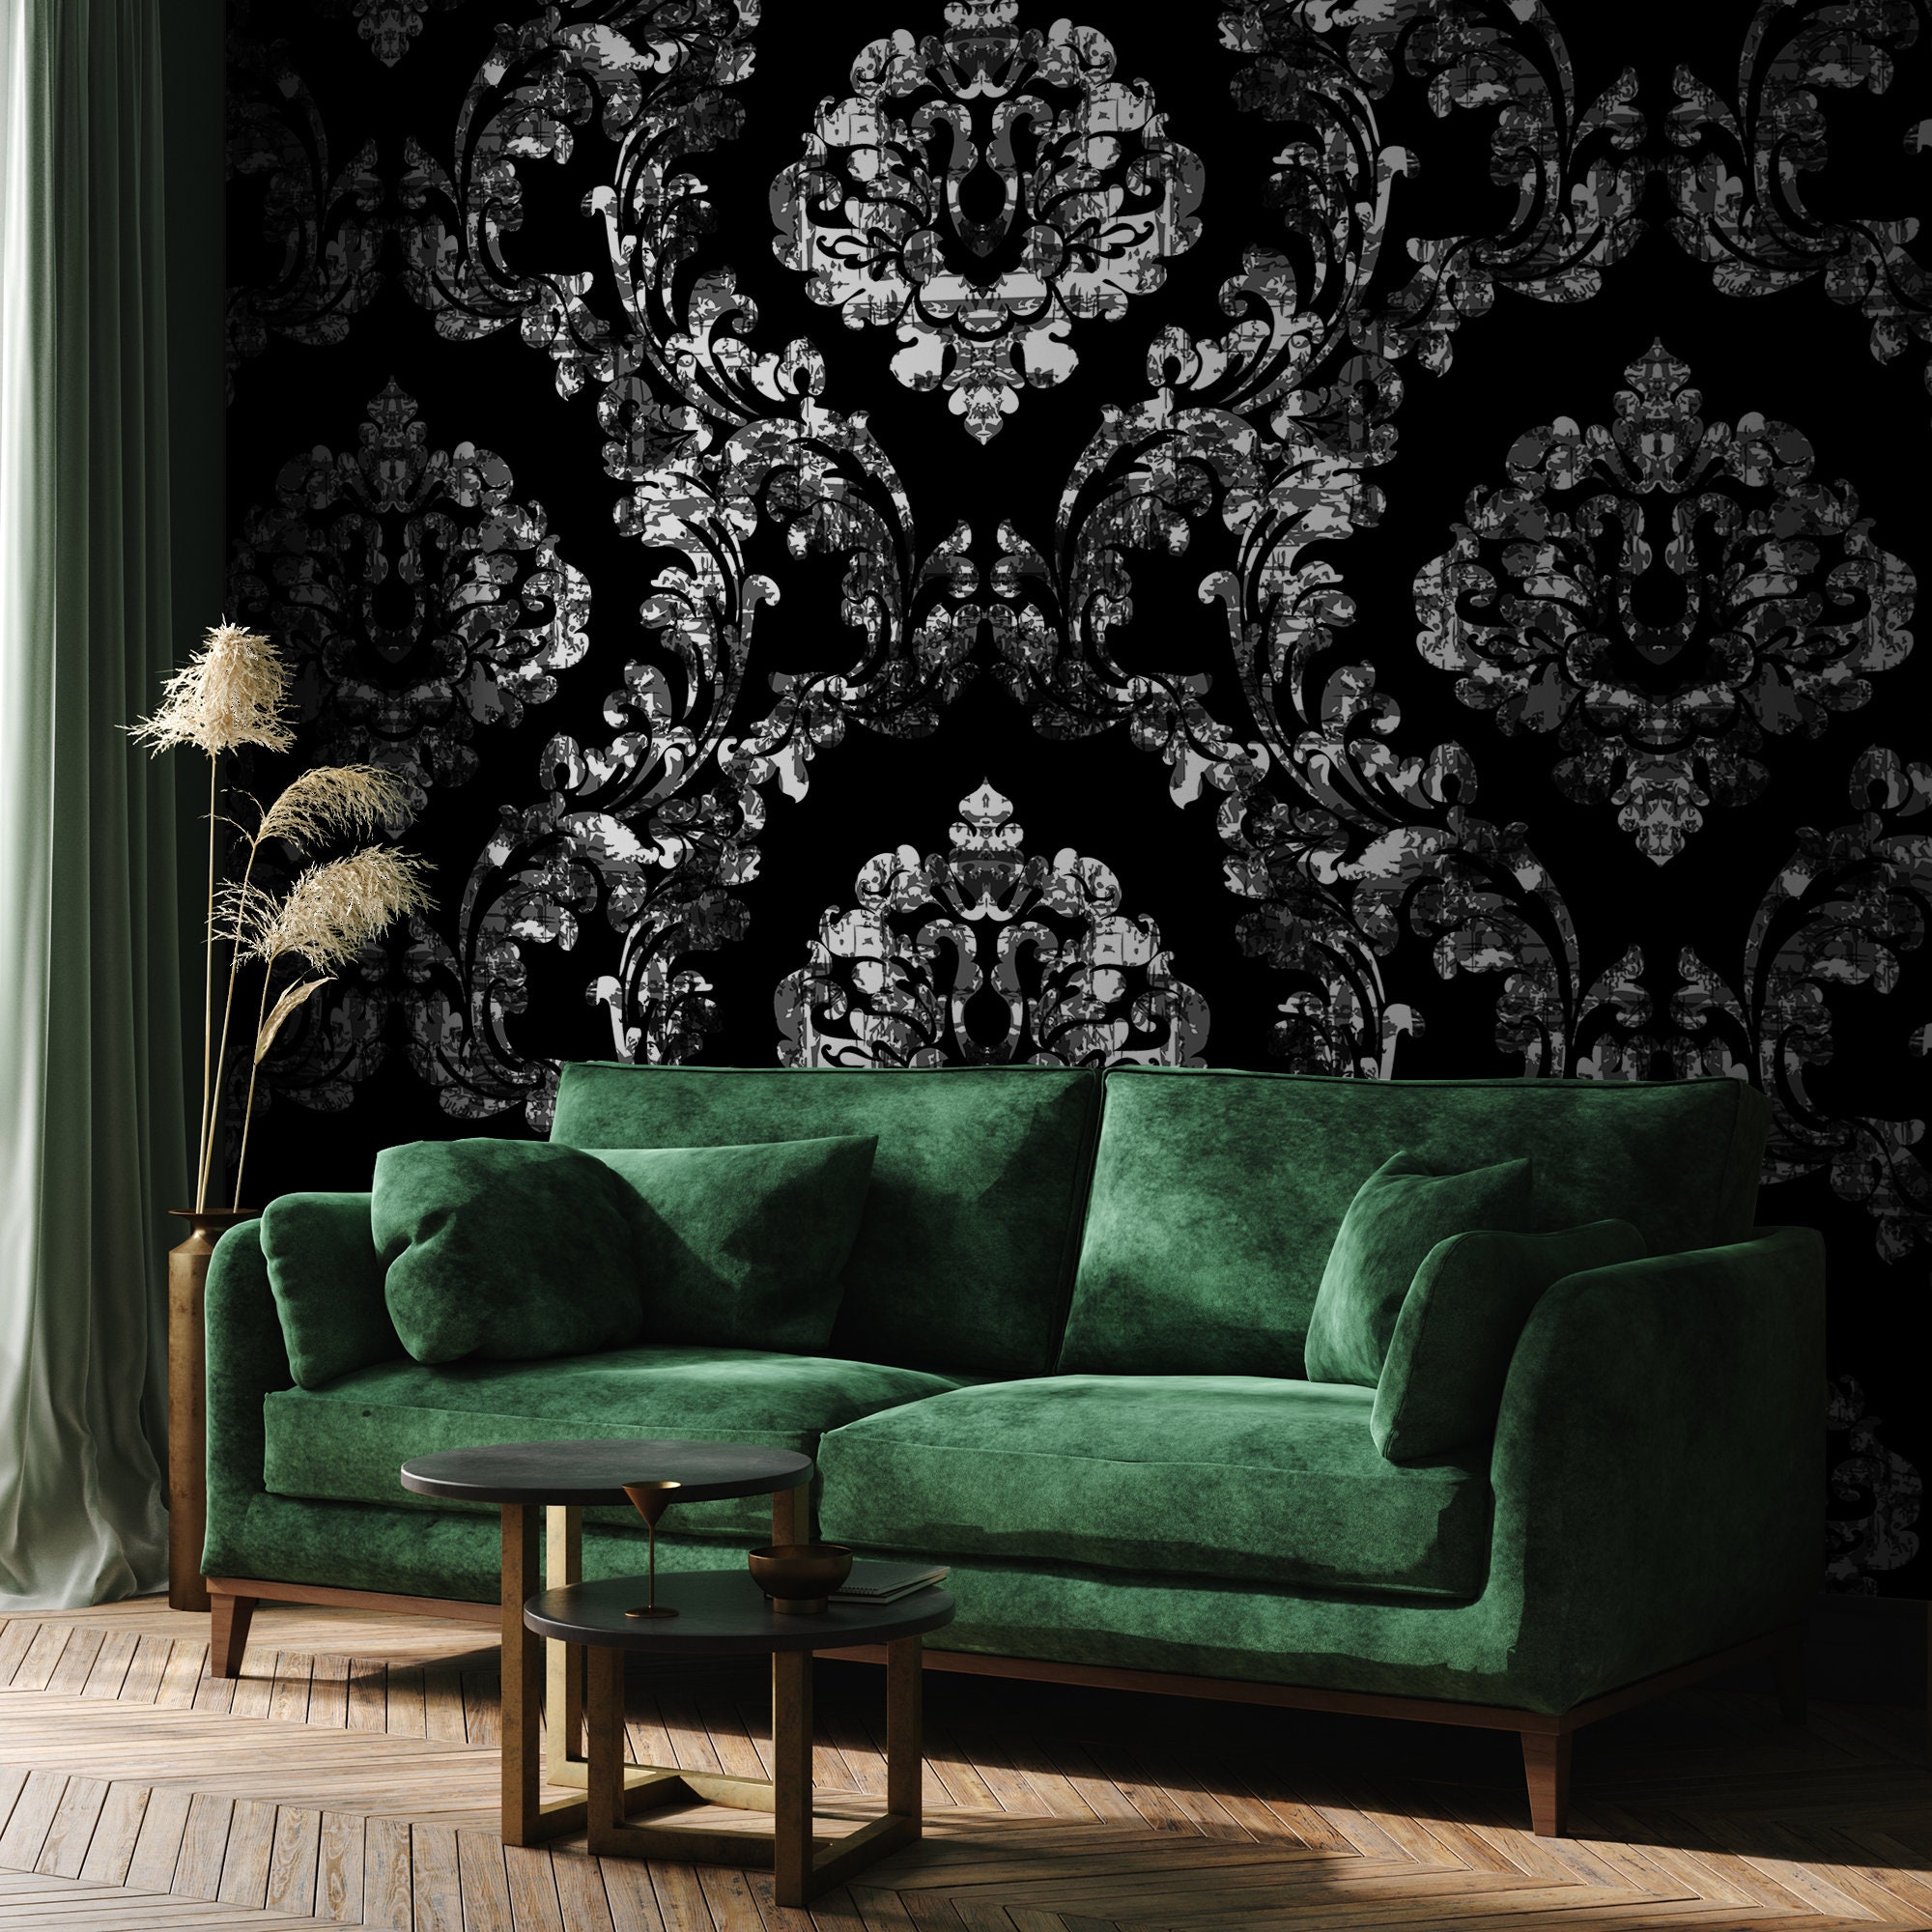 High Resolution Patterned Wallpaper Stock Illustration  Download Image Now   Wallpaper  Decor Backgrounds Gothic Style  iStock